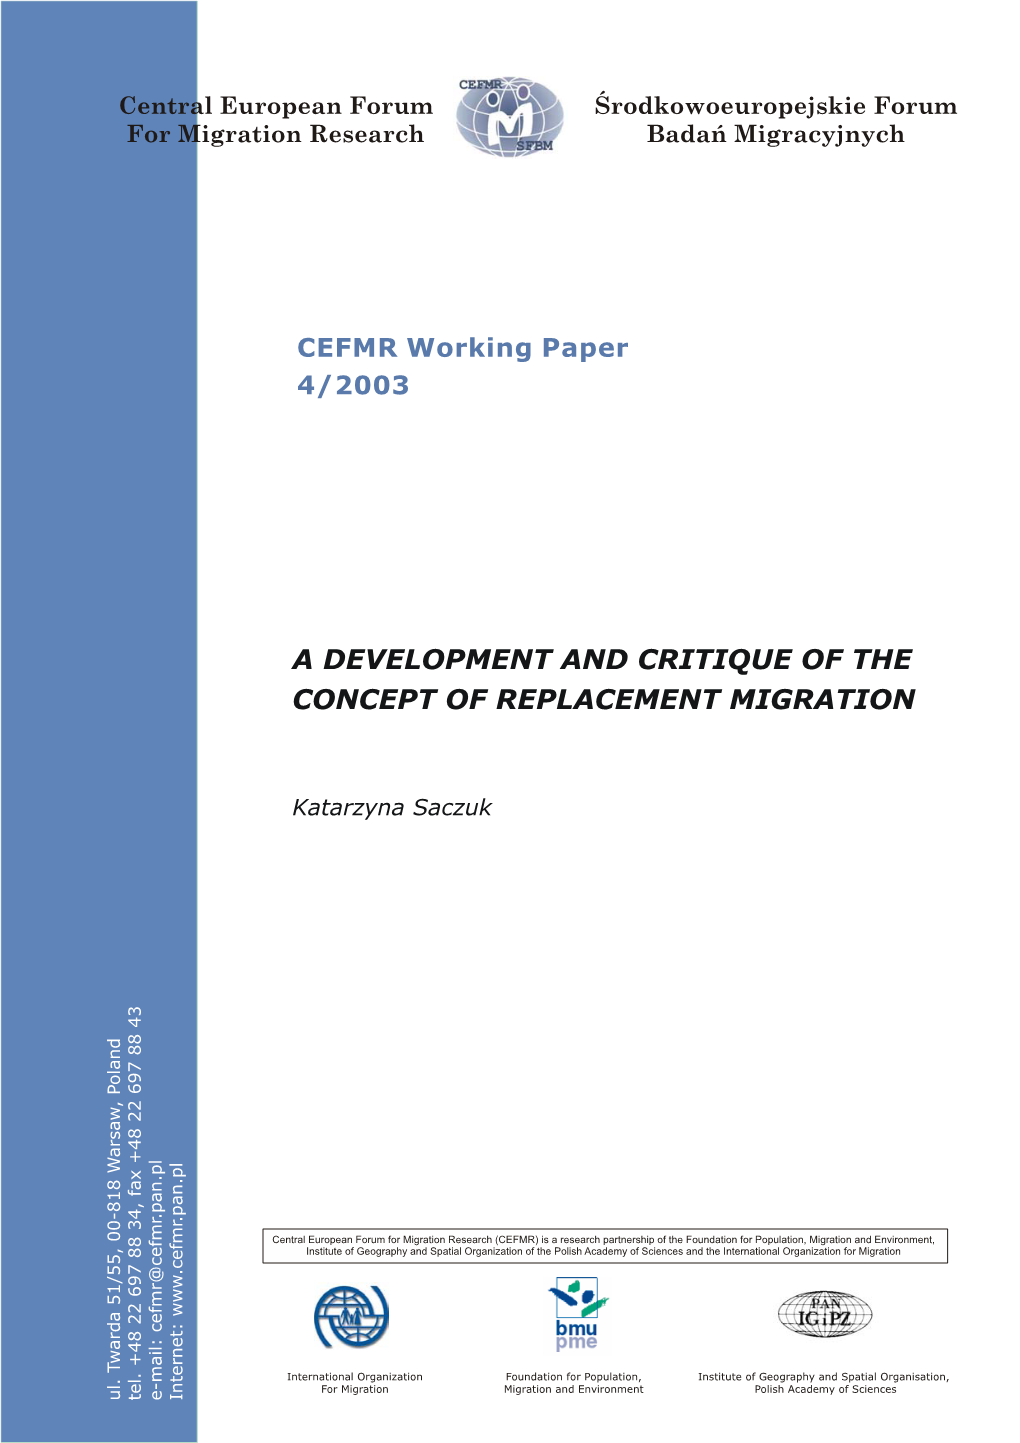 A Development and Critique of the Concept of Replacement Migration